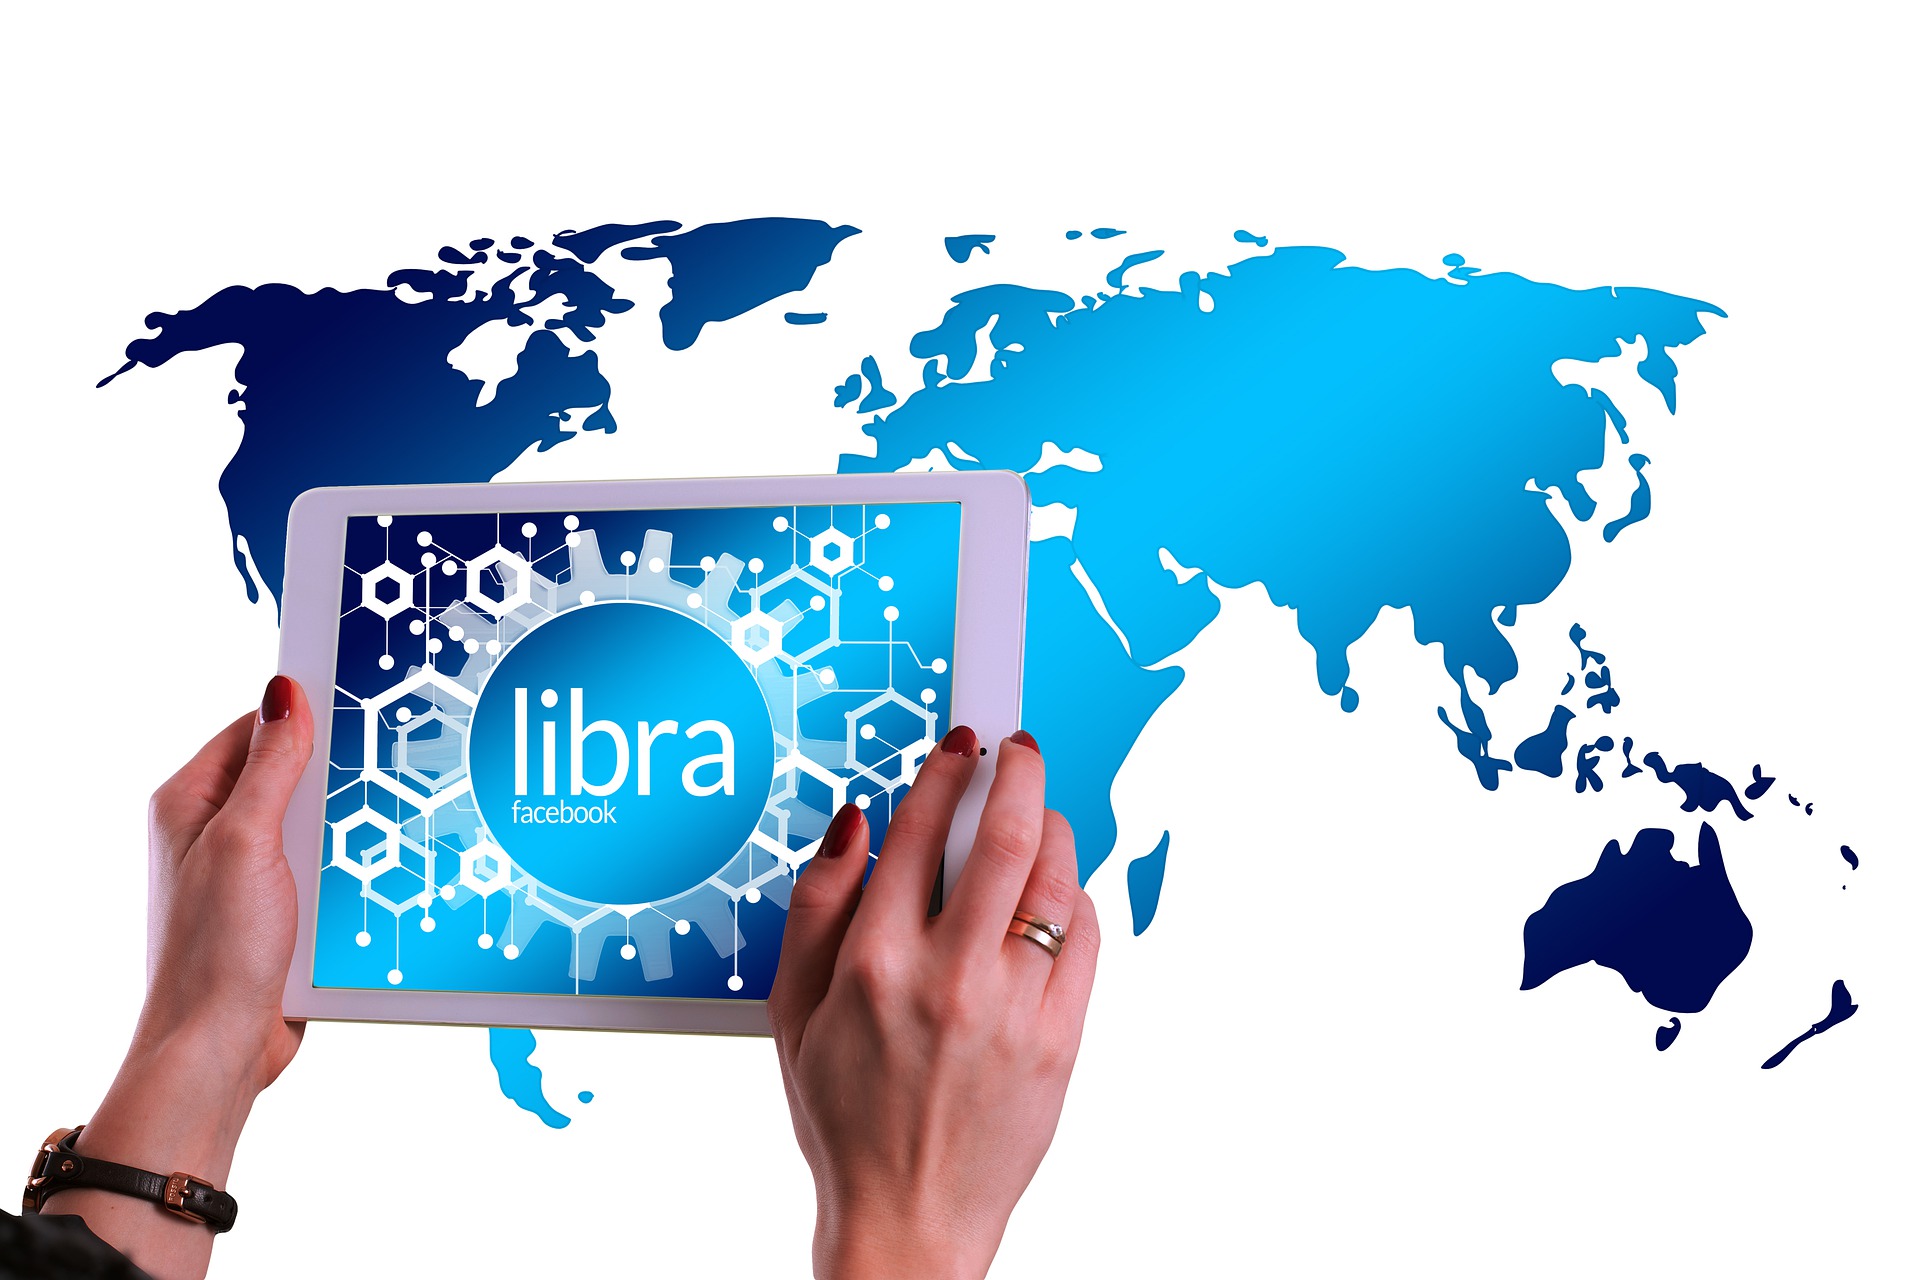 Hands holding a tablet with Libra on the screen with world map in background